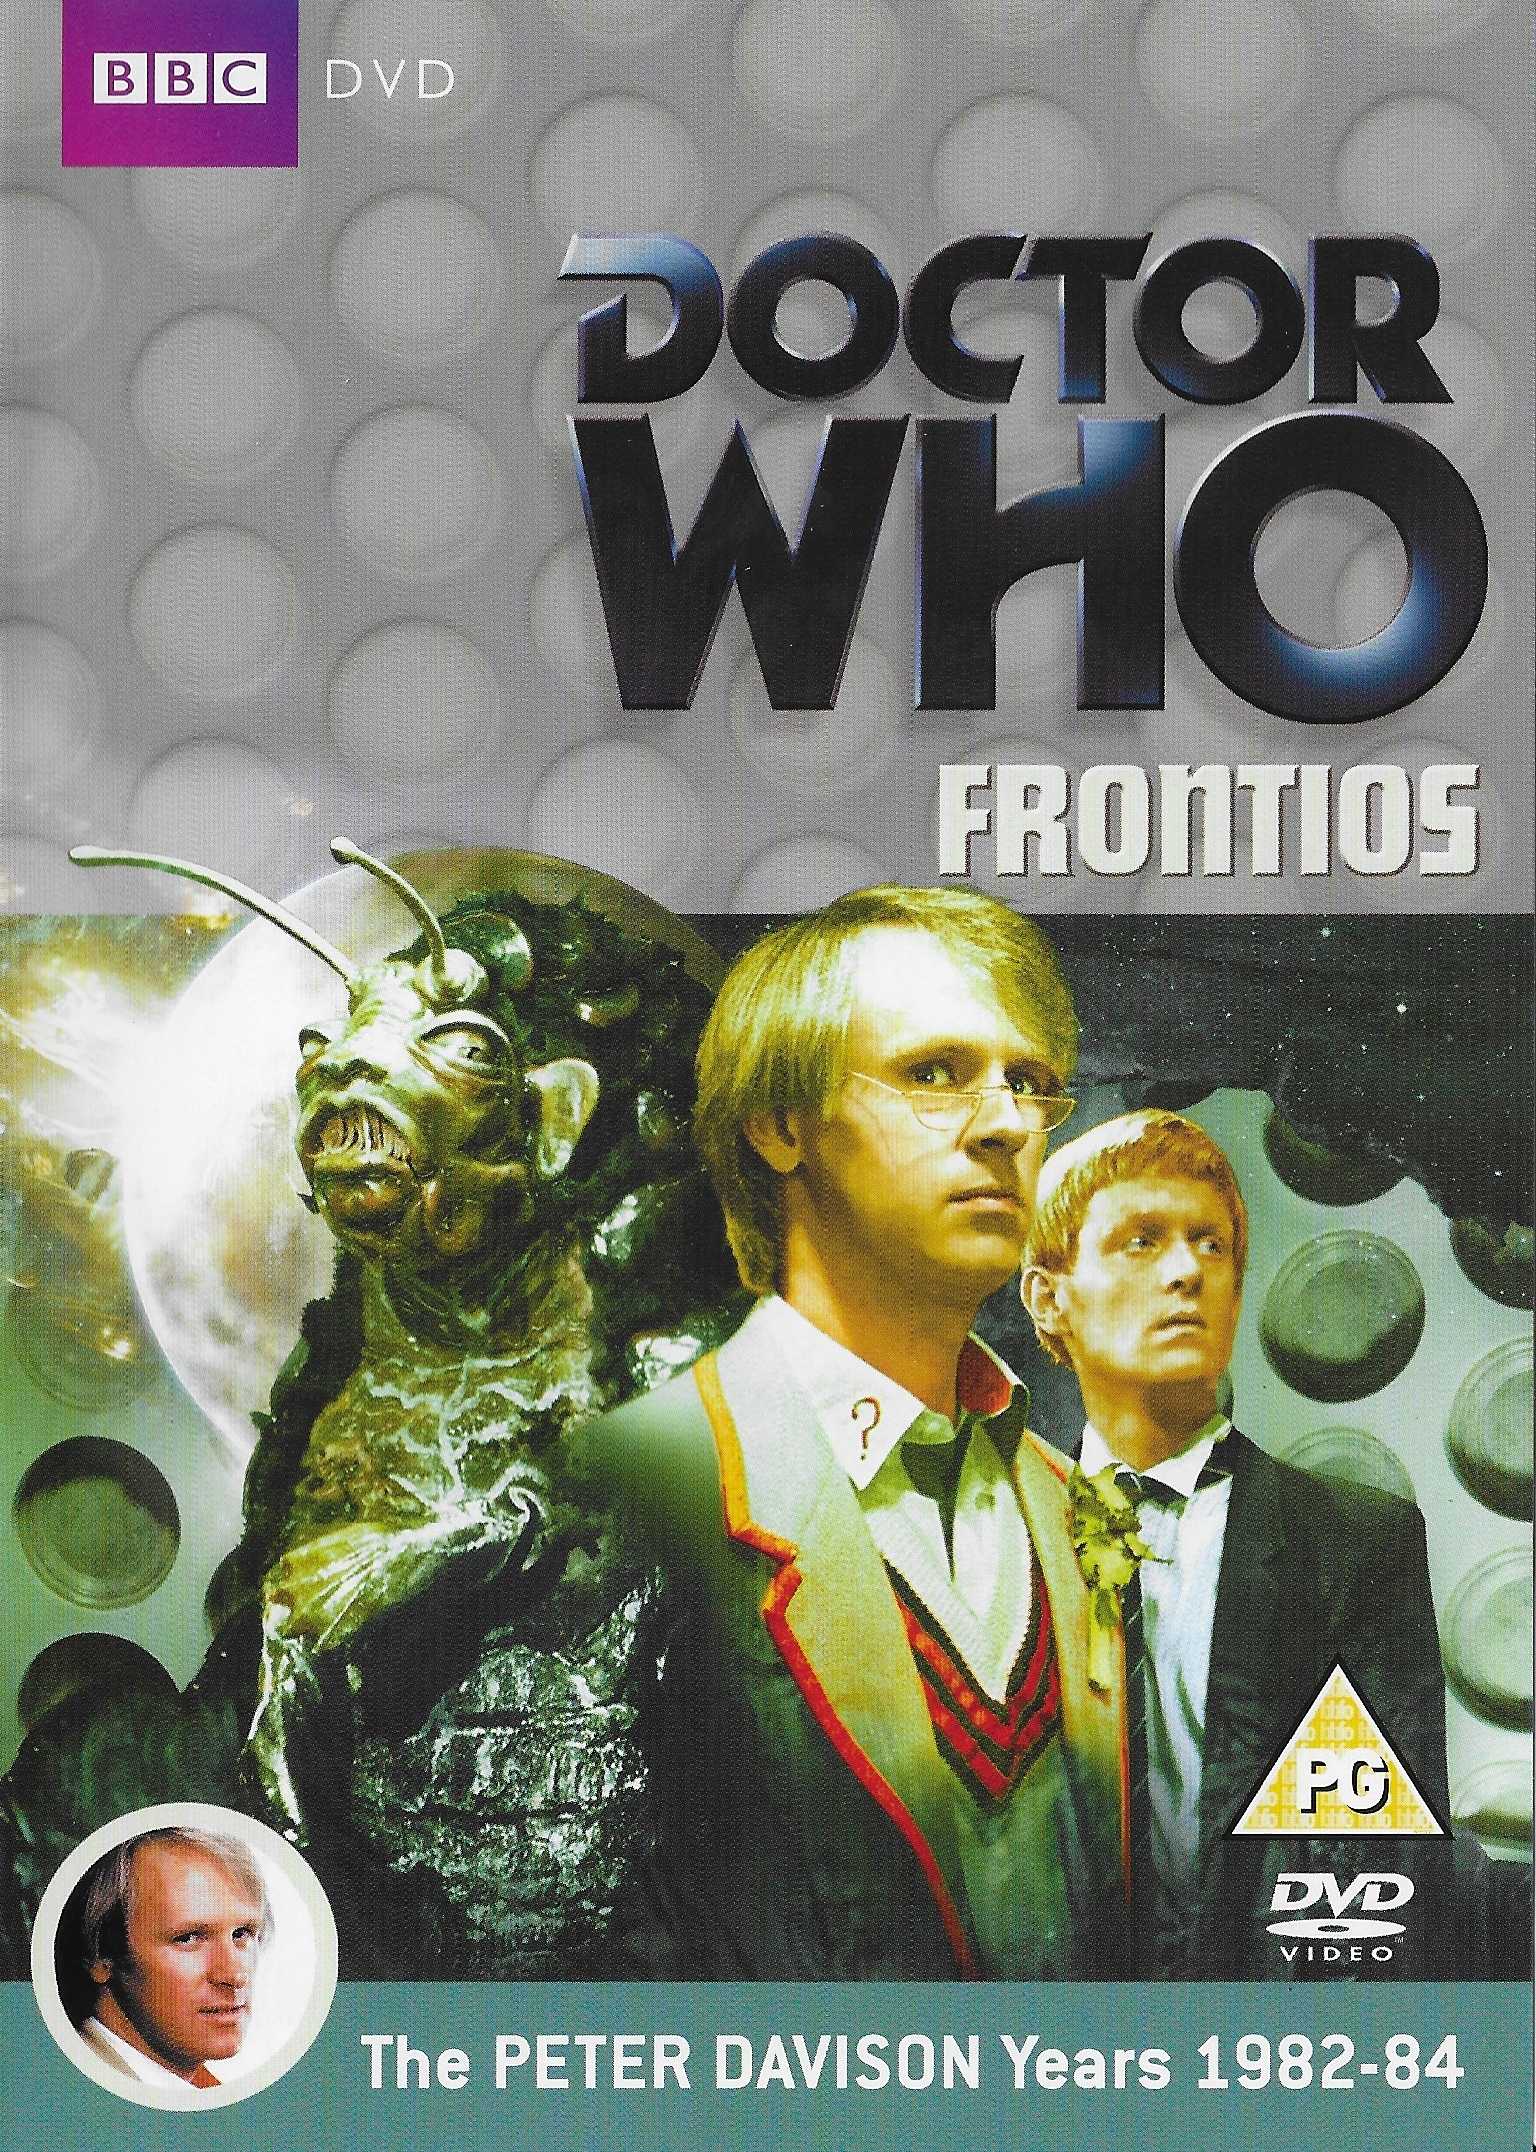 Picture of BBCDVD 3004 Doctor Who - Frontios by artist Christopher H. Bedmead from the BBC dvds - Records and Tapes library